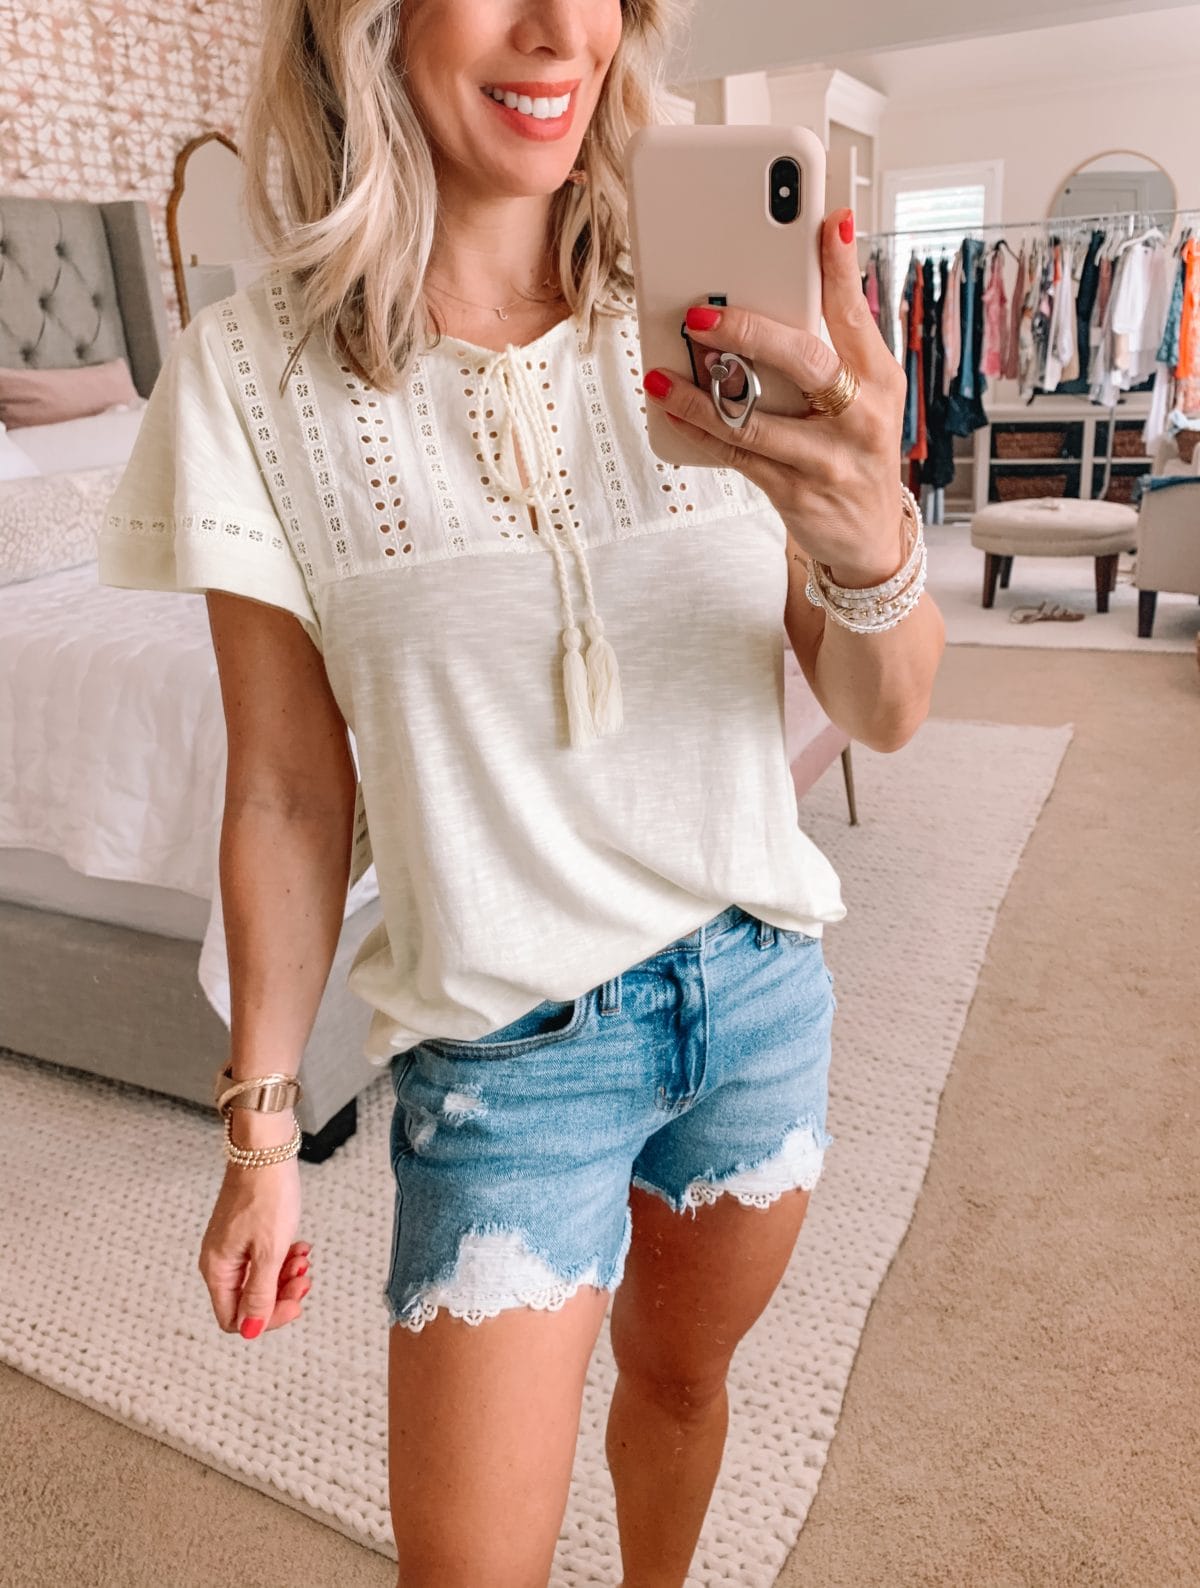 Dressing Room Finds Nordstrom and Target, Embroidered Ruffle Sleeve Top, Crochet Hemmed Denim Shorts